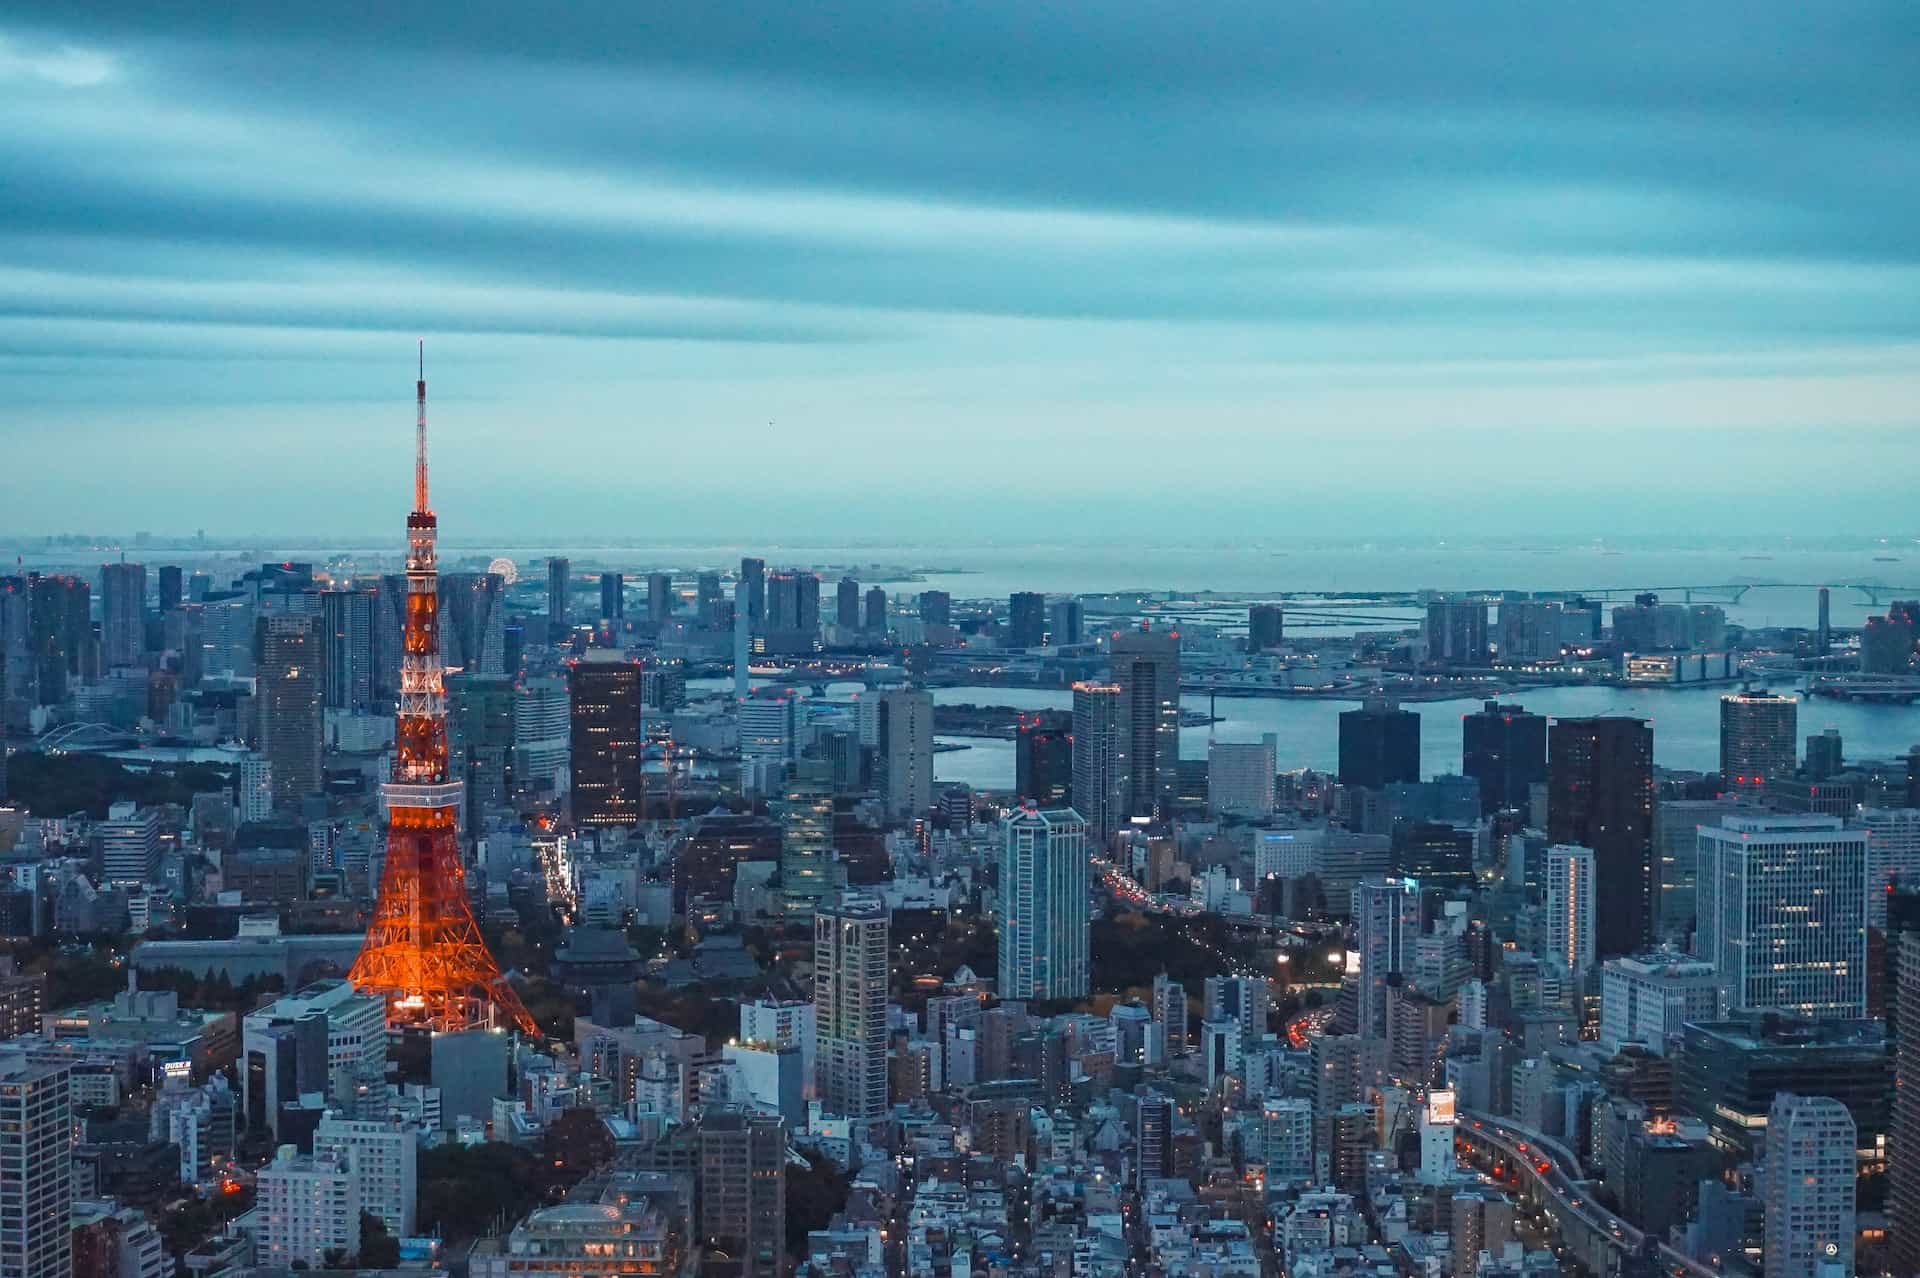 An aerial view of central Tokyo as night begins to fall, featuring endless tall buildings and skyscrapers wrapped around a bay.